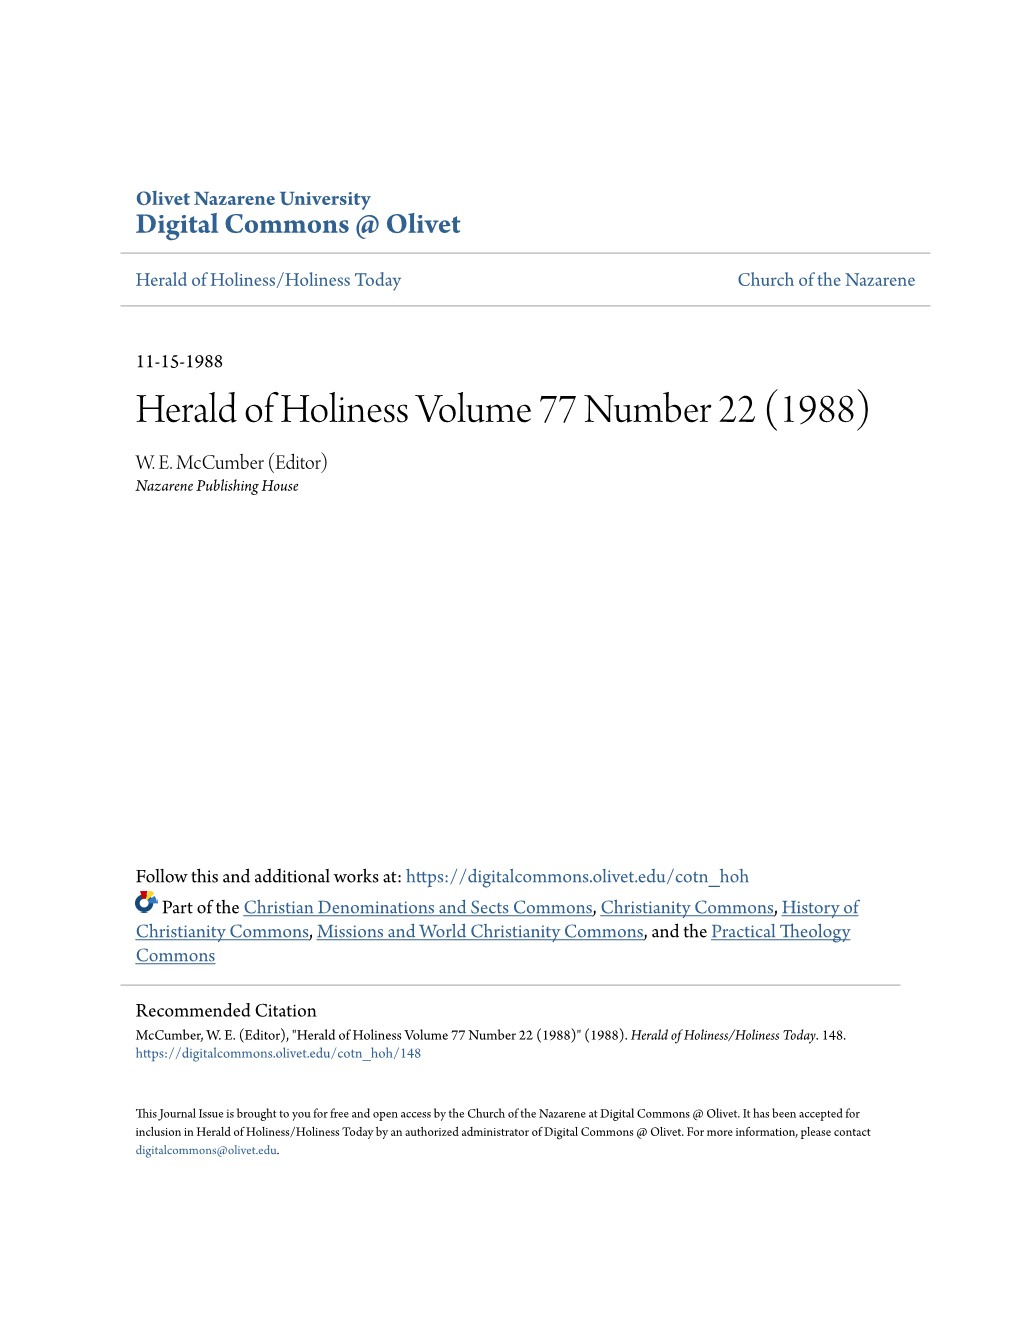 Herald of Holiness Volume 77 Number 22 (1988) W